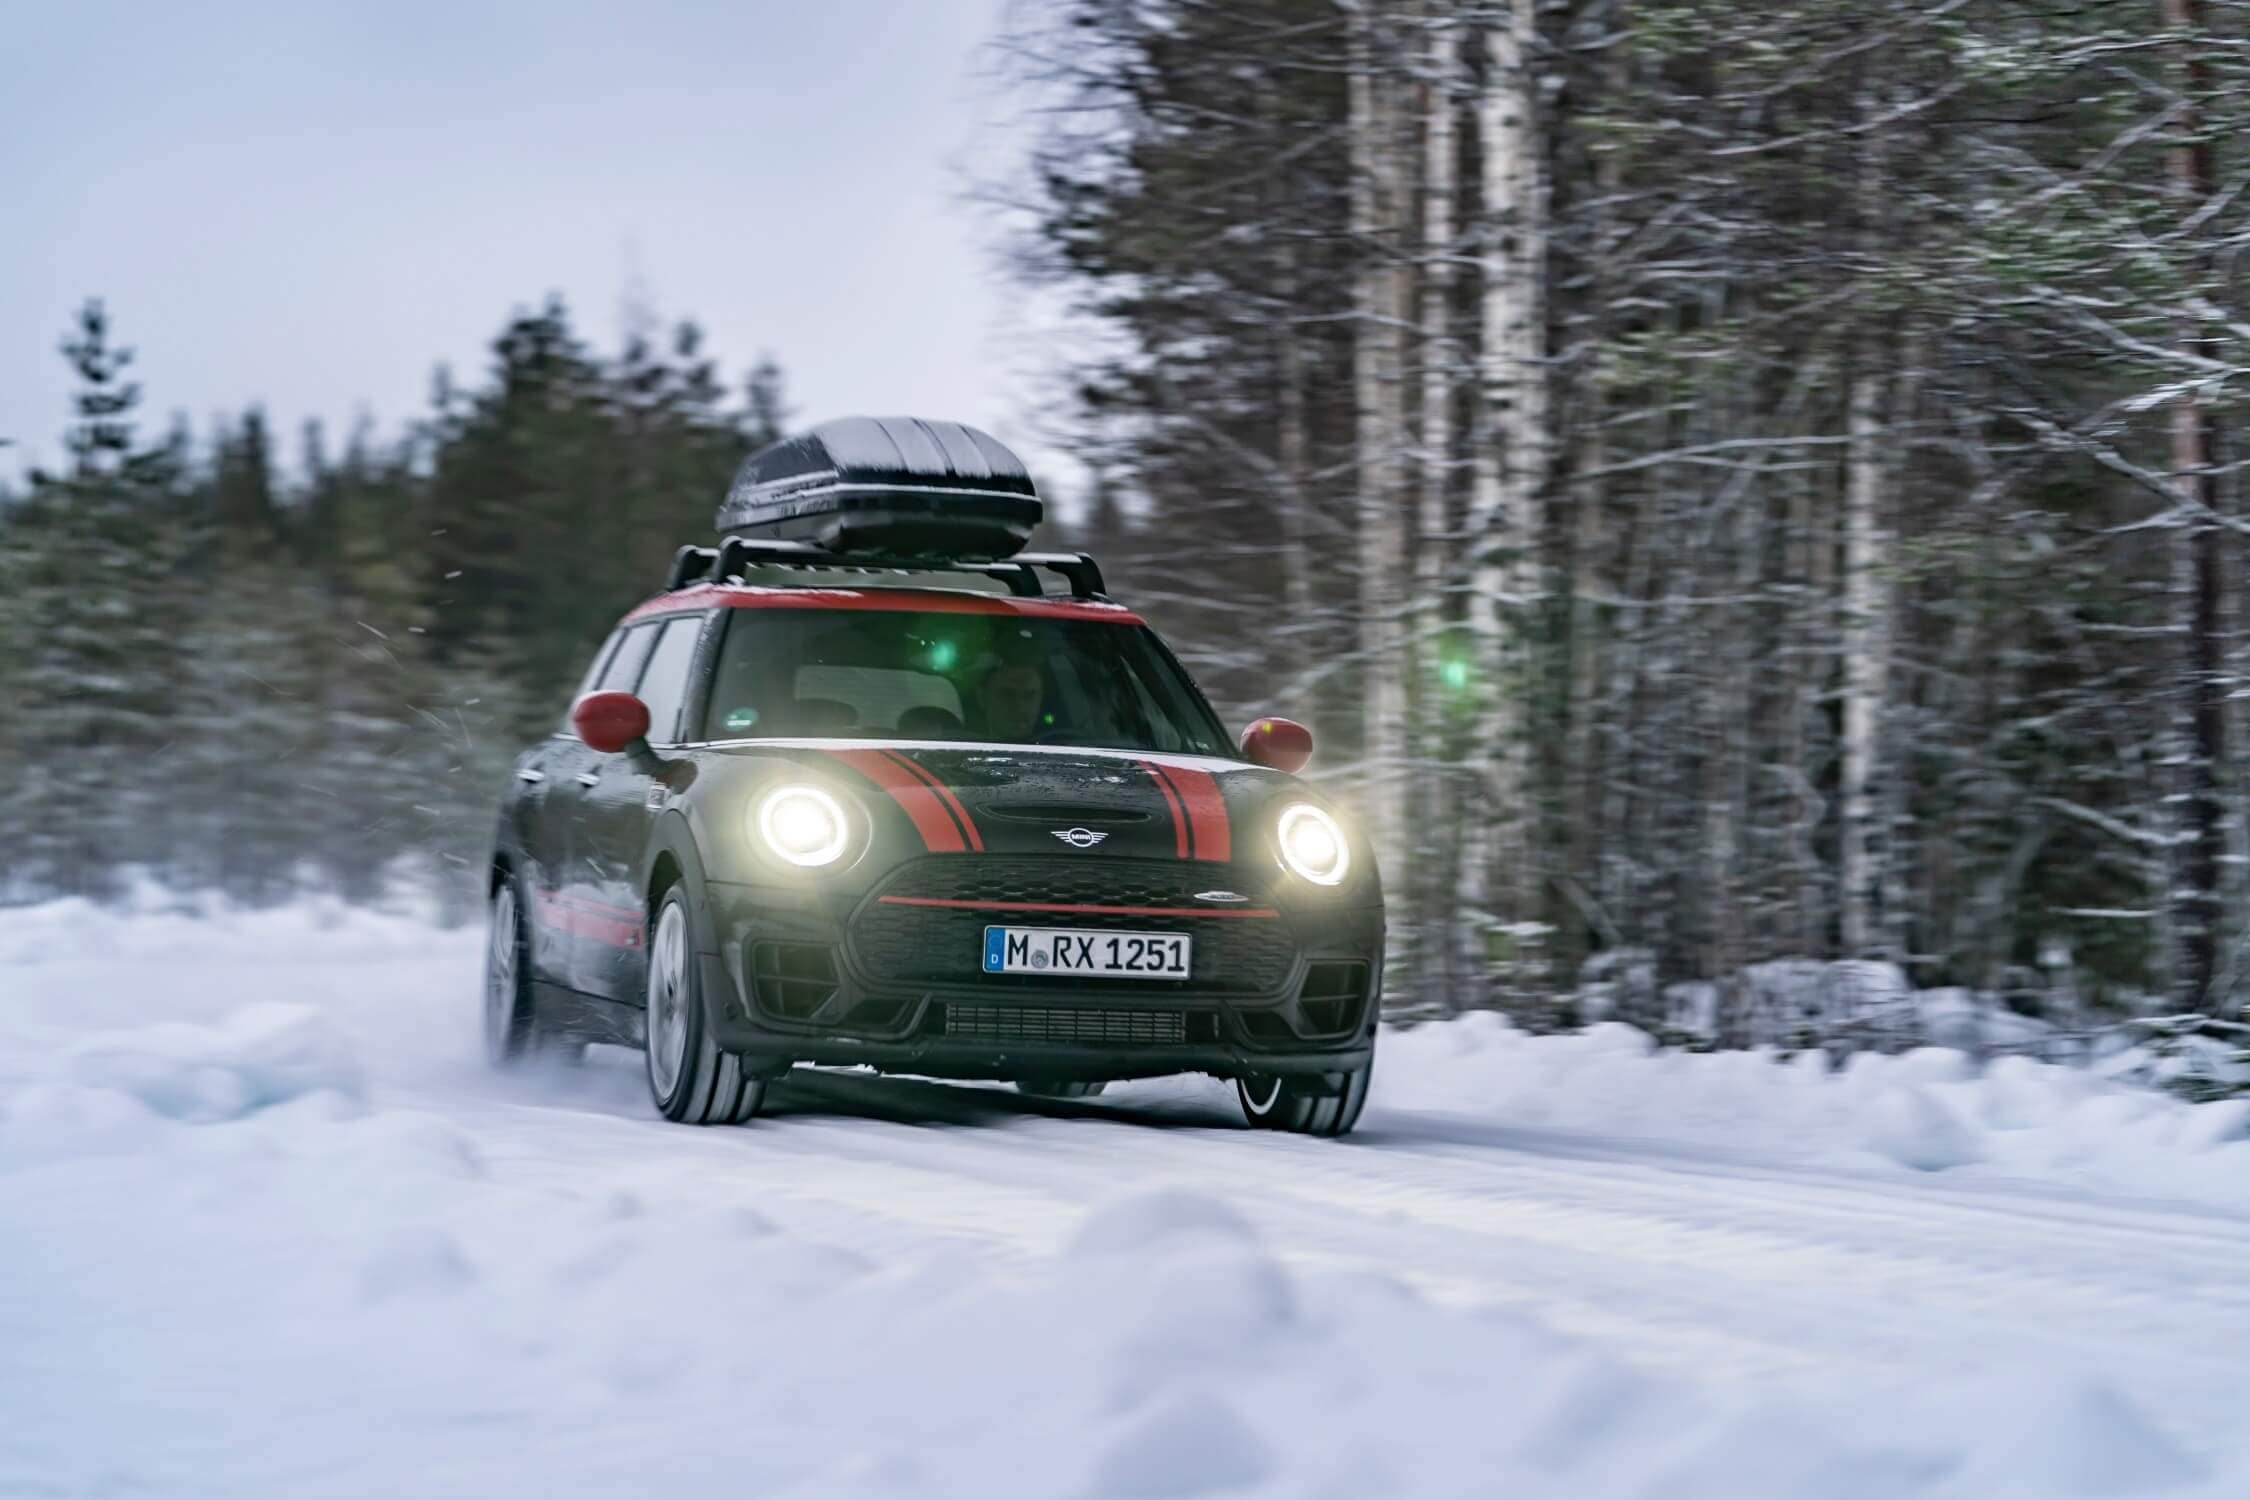 Exterior view of a MINI vehicle driving in snowy conditions